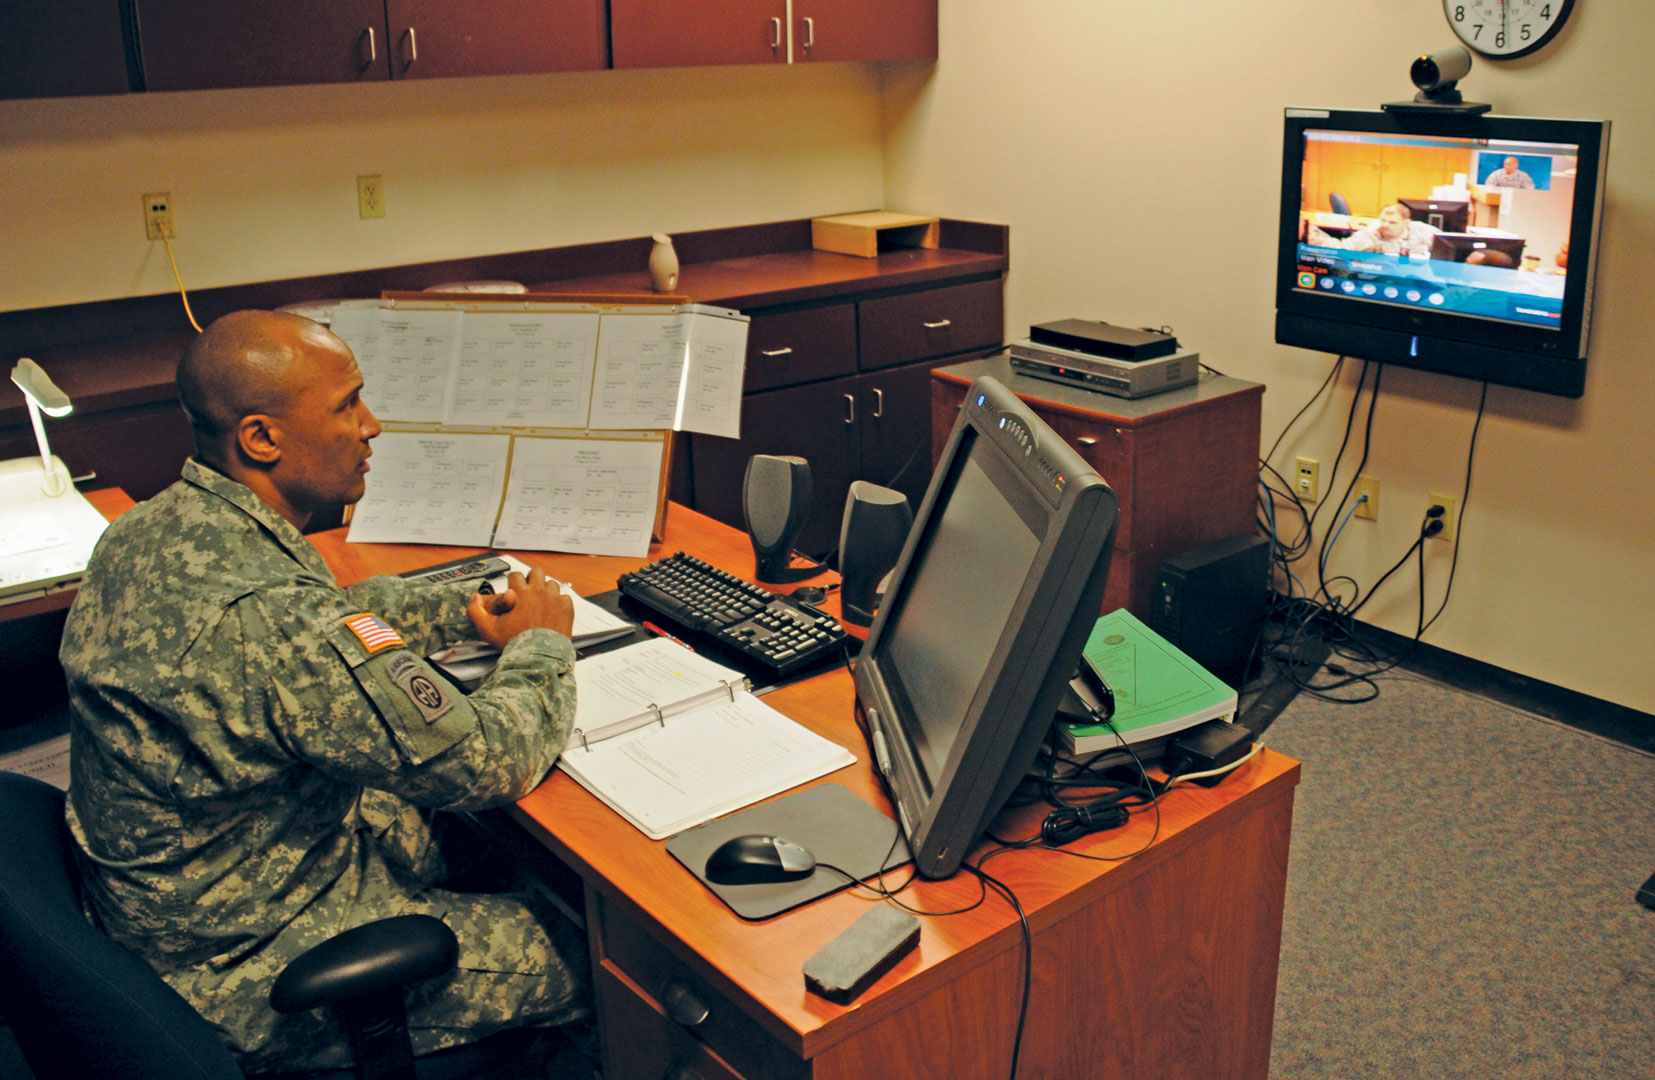 From USASMA, Master Sgt. David Foulkes teaches BSNCOC students via video teletraining in November 2012. (Photo by Staff Sgt. Jason Stadel)